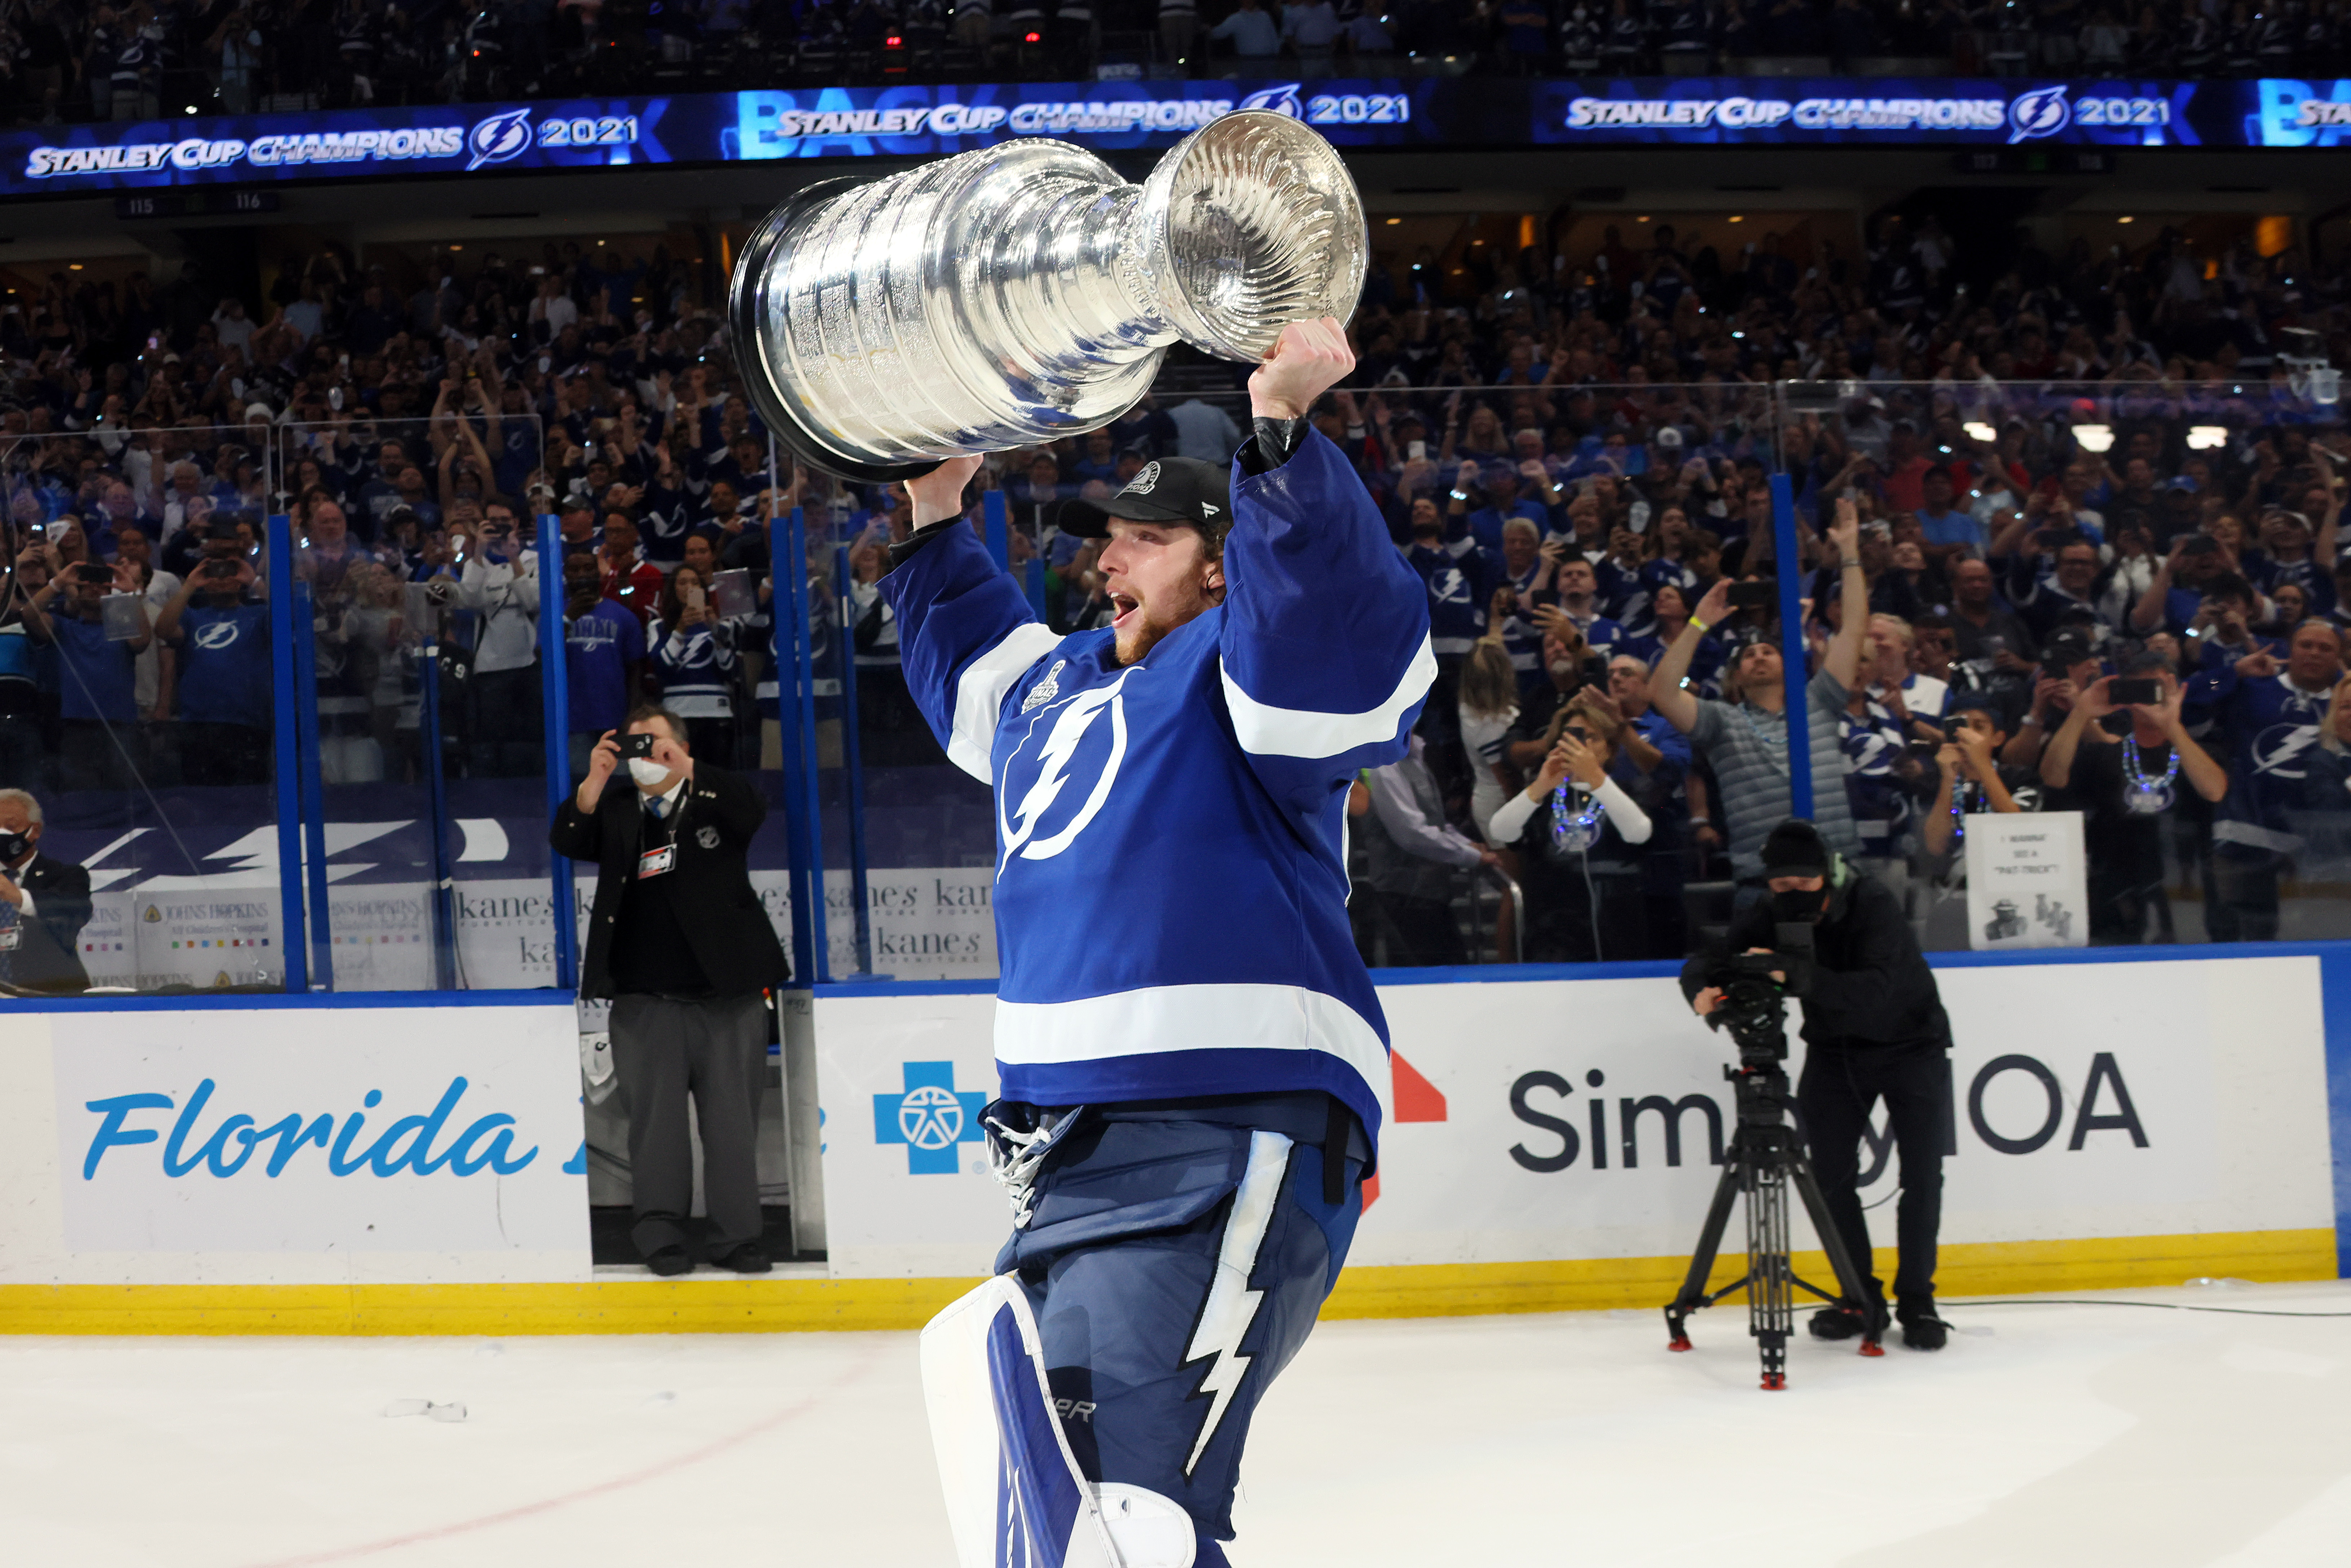 Ryan McDonagh wins second straight Stanley Cup